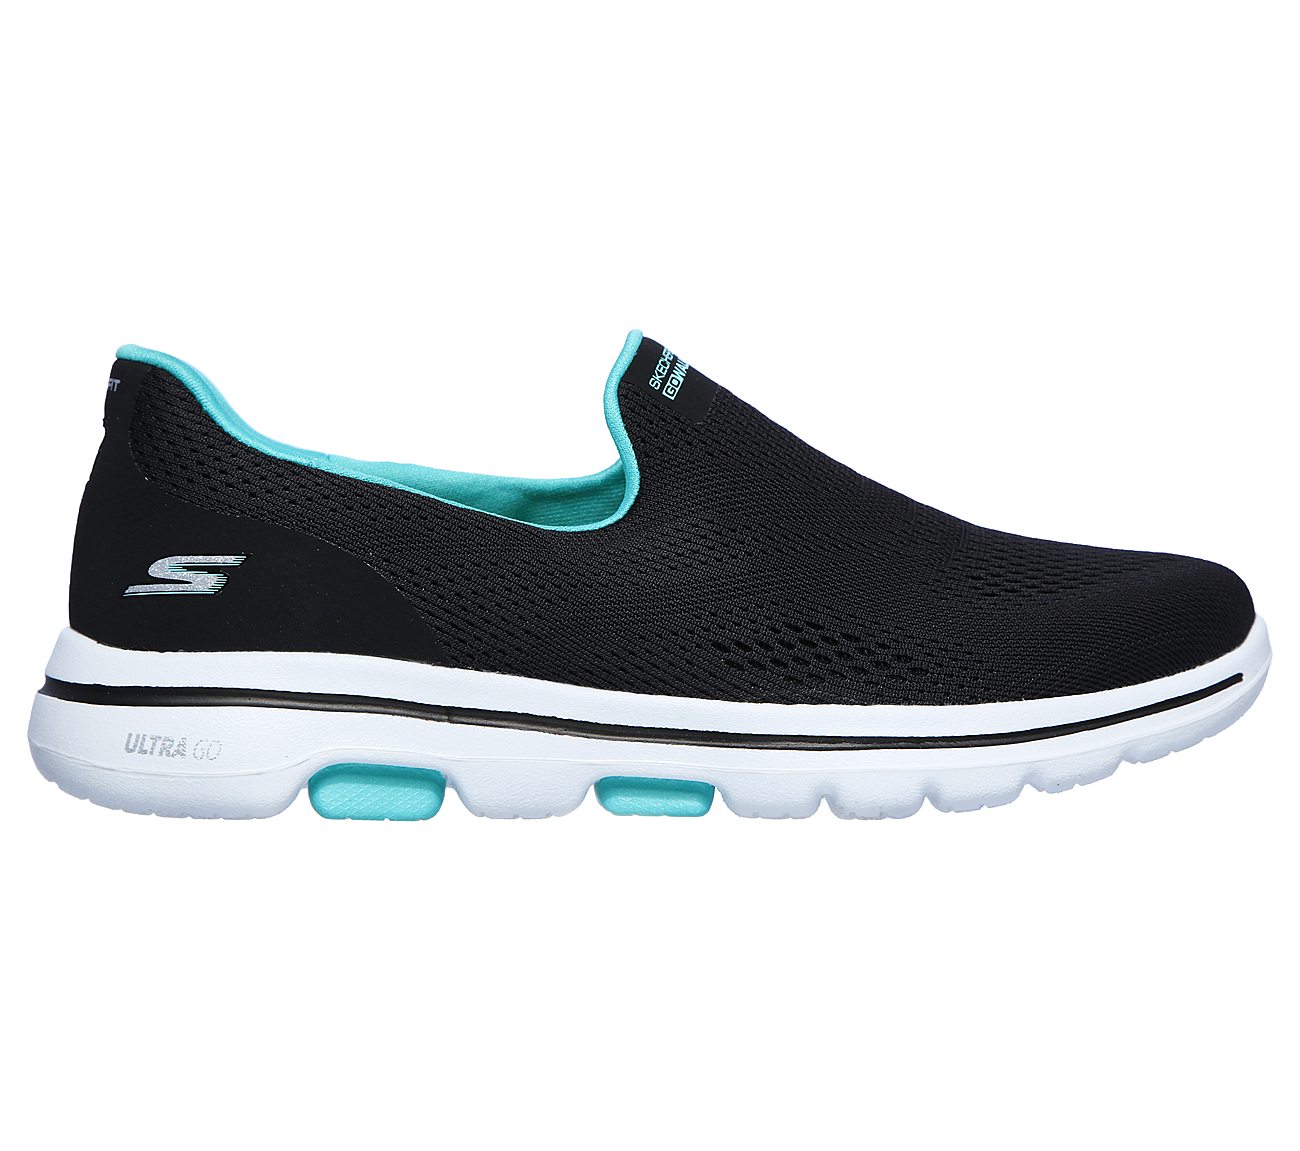 GO WALK 5, BLACK/TURQUOISE Footwear Lateral View